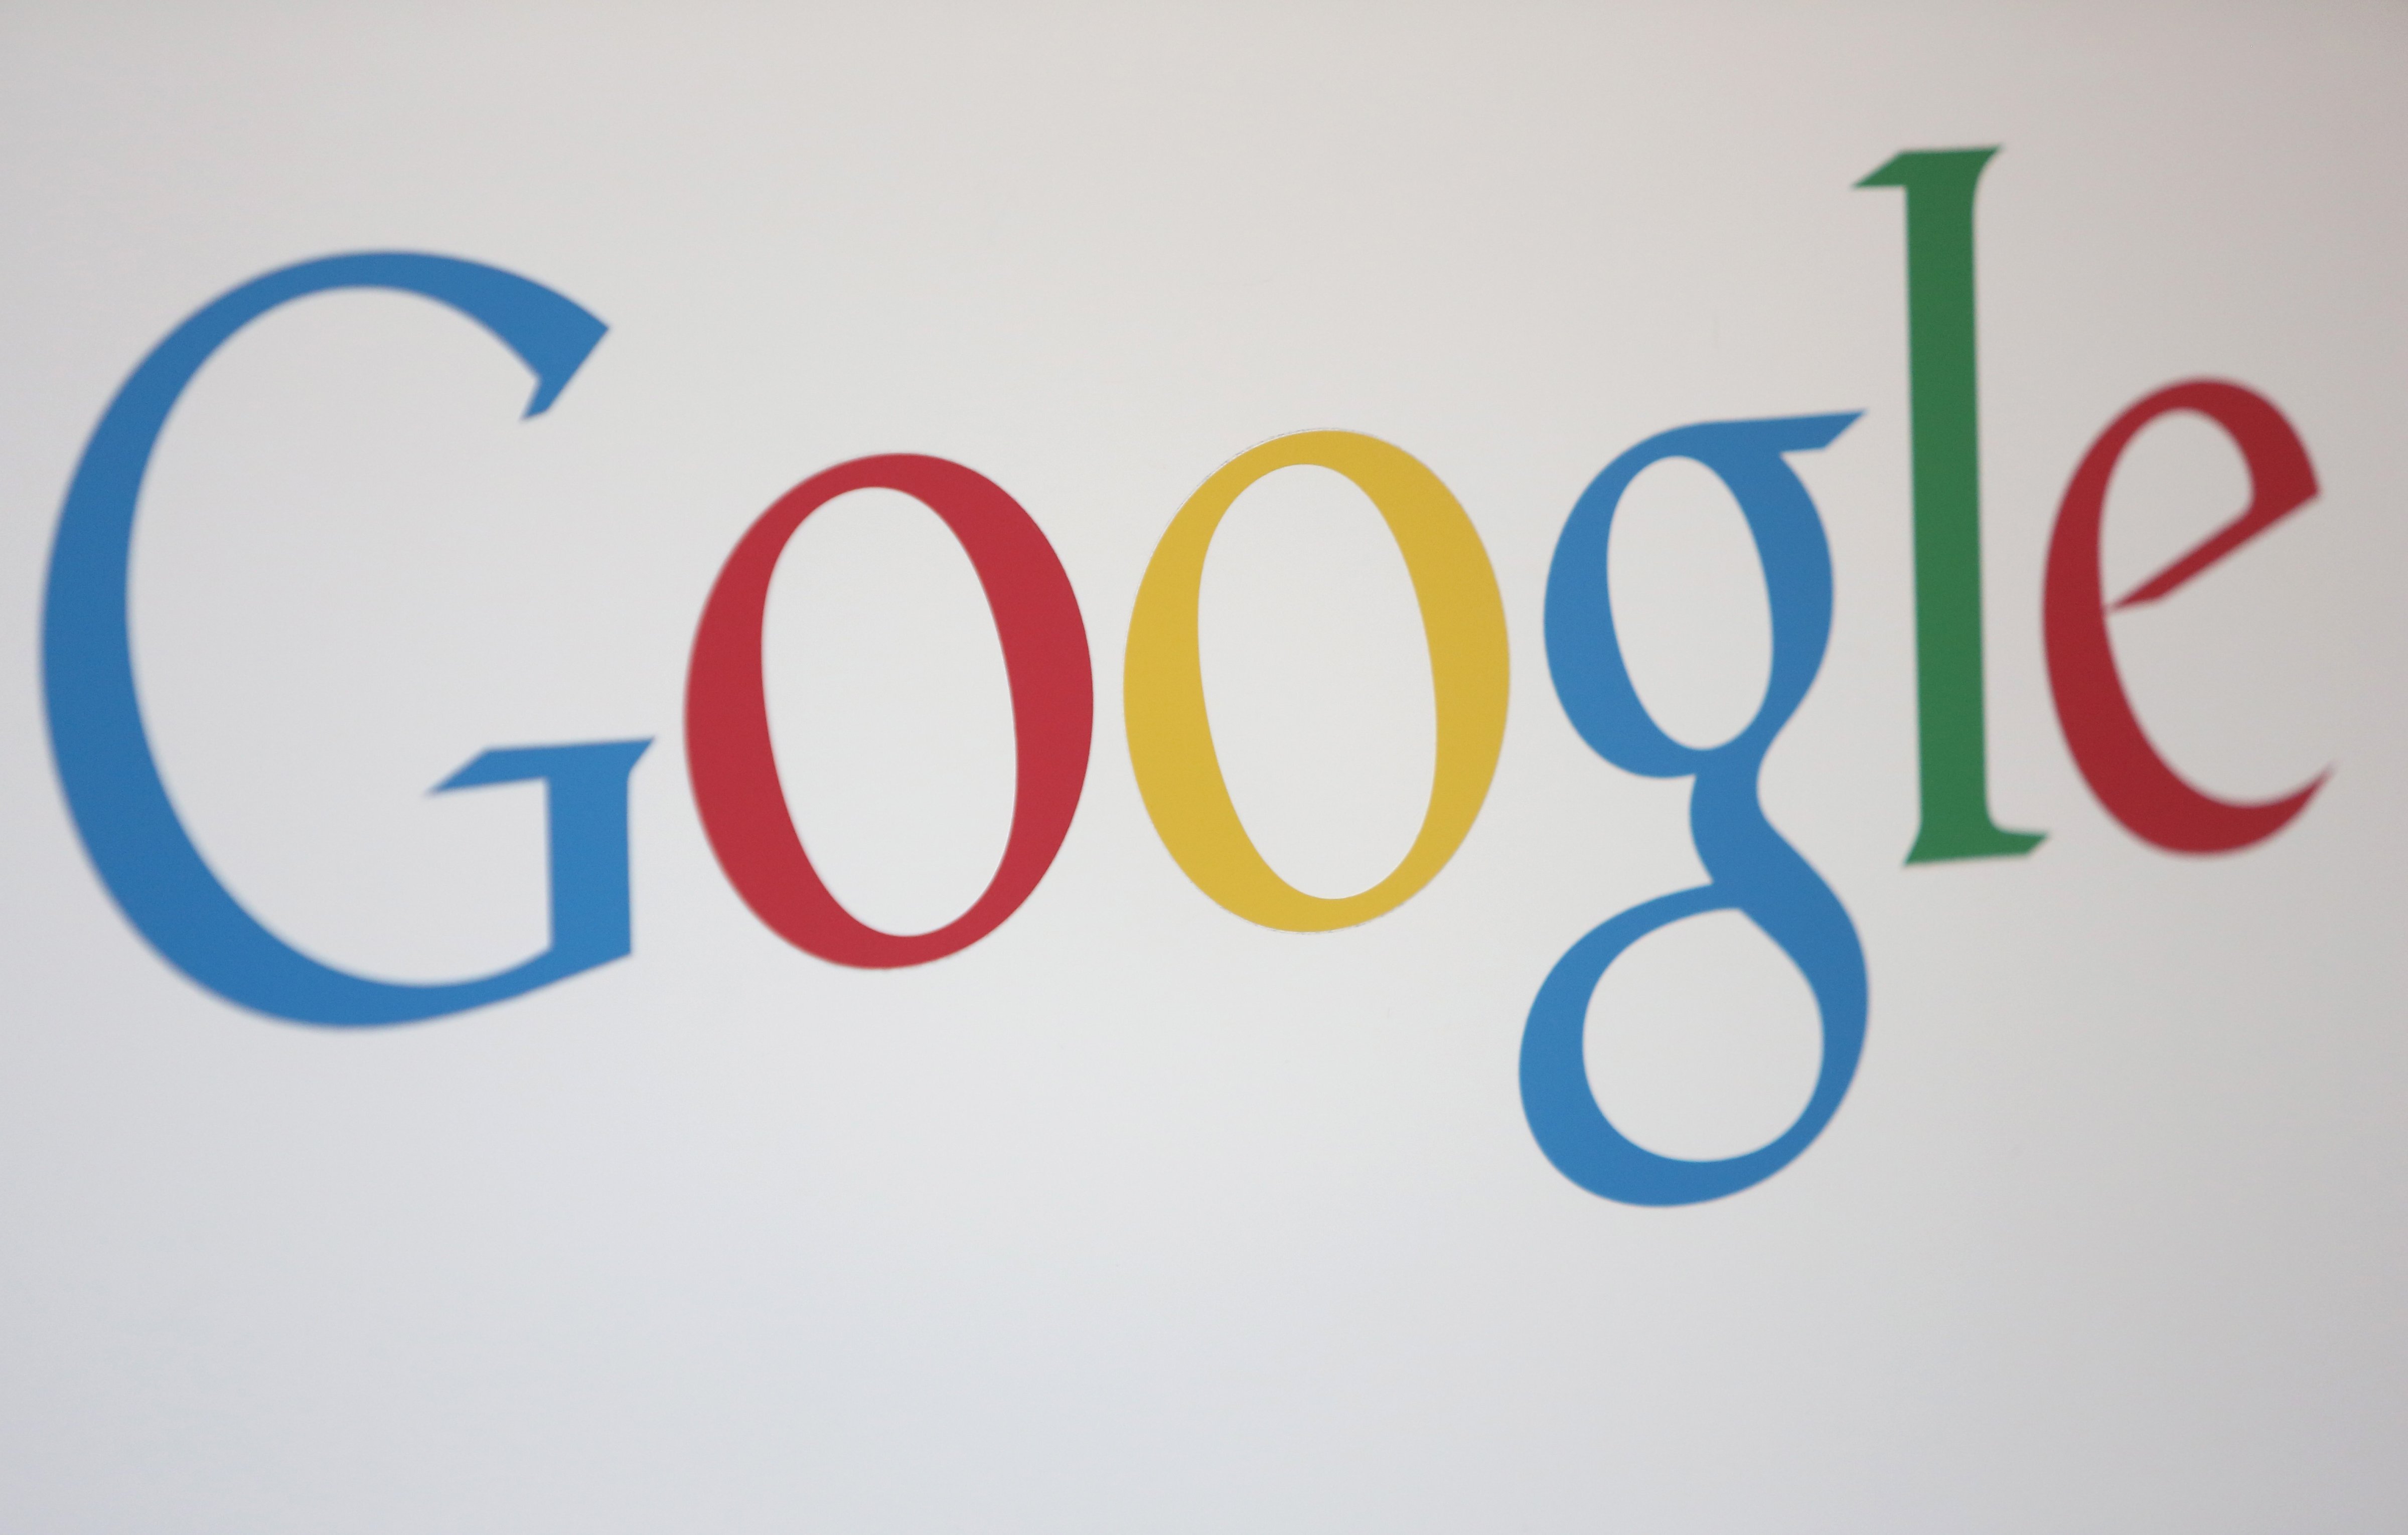 The Google logo is seen at the company's offices on August 21, 2014 in Berlin, Germany. (Adam Berry&mdash;Getty Images)